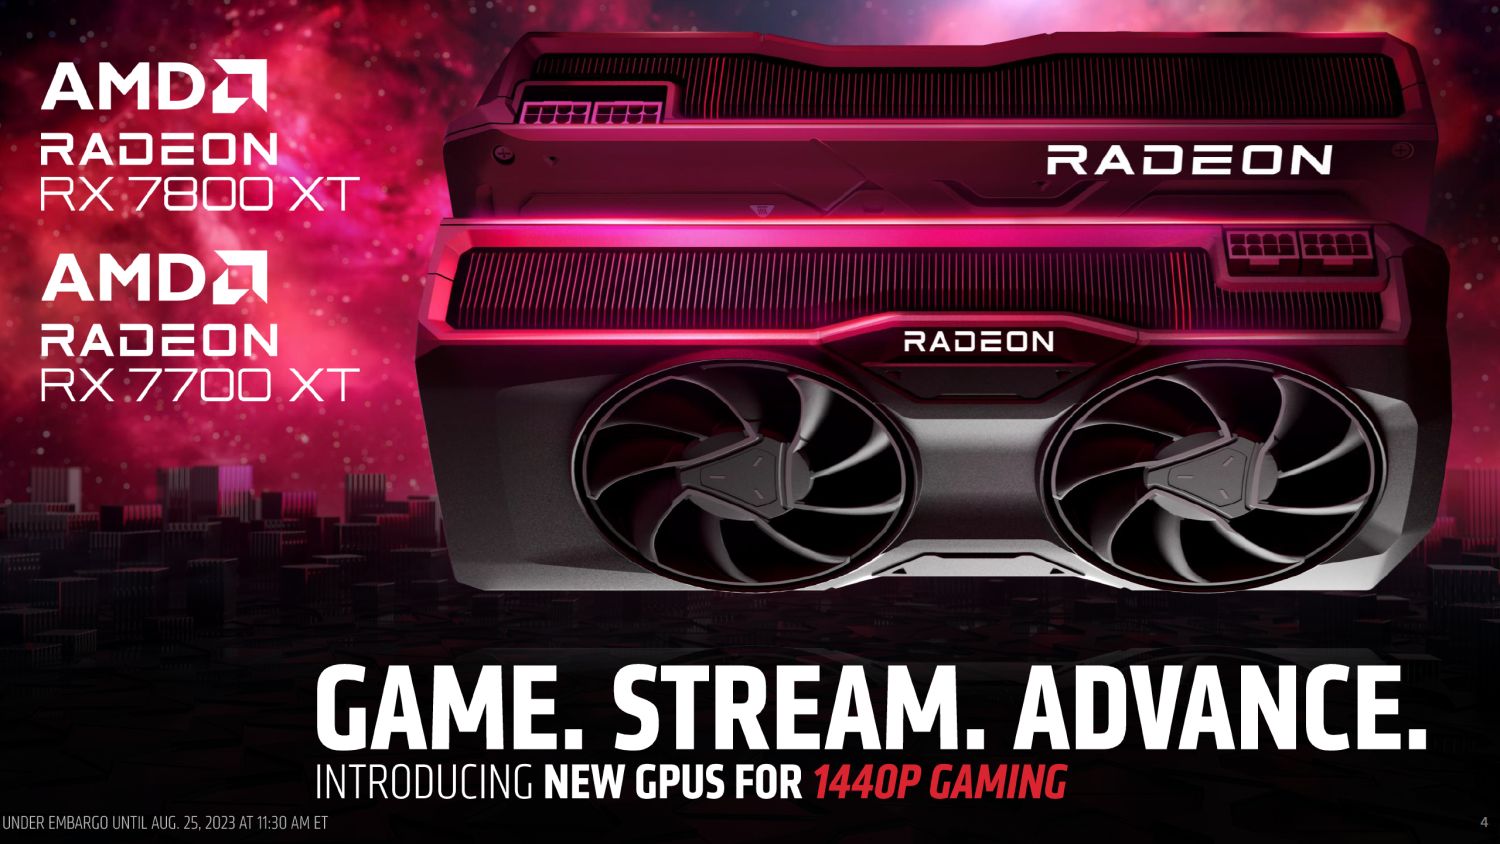 AMD Rumored To Launch Radeon RX 7800 XT & RX 7700 XT GPUs In Late Q3